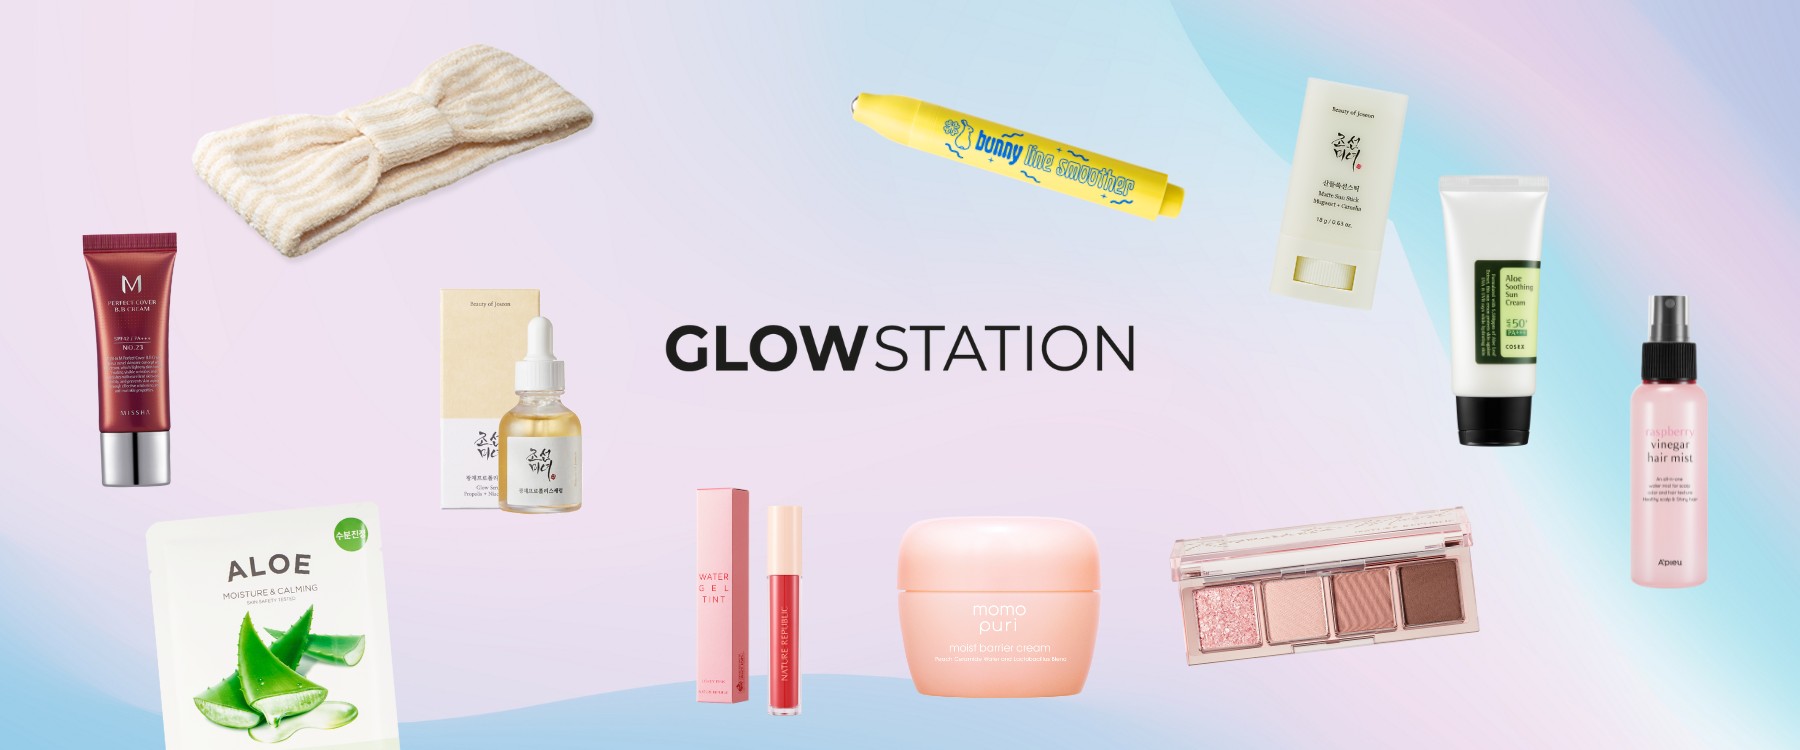 All products at GlowStation category